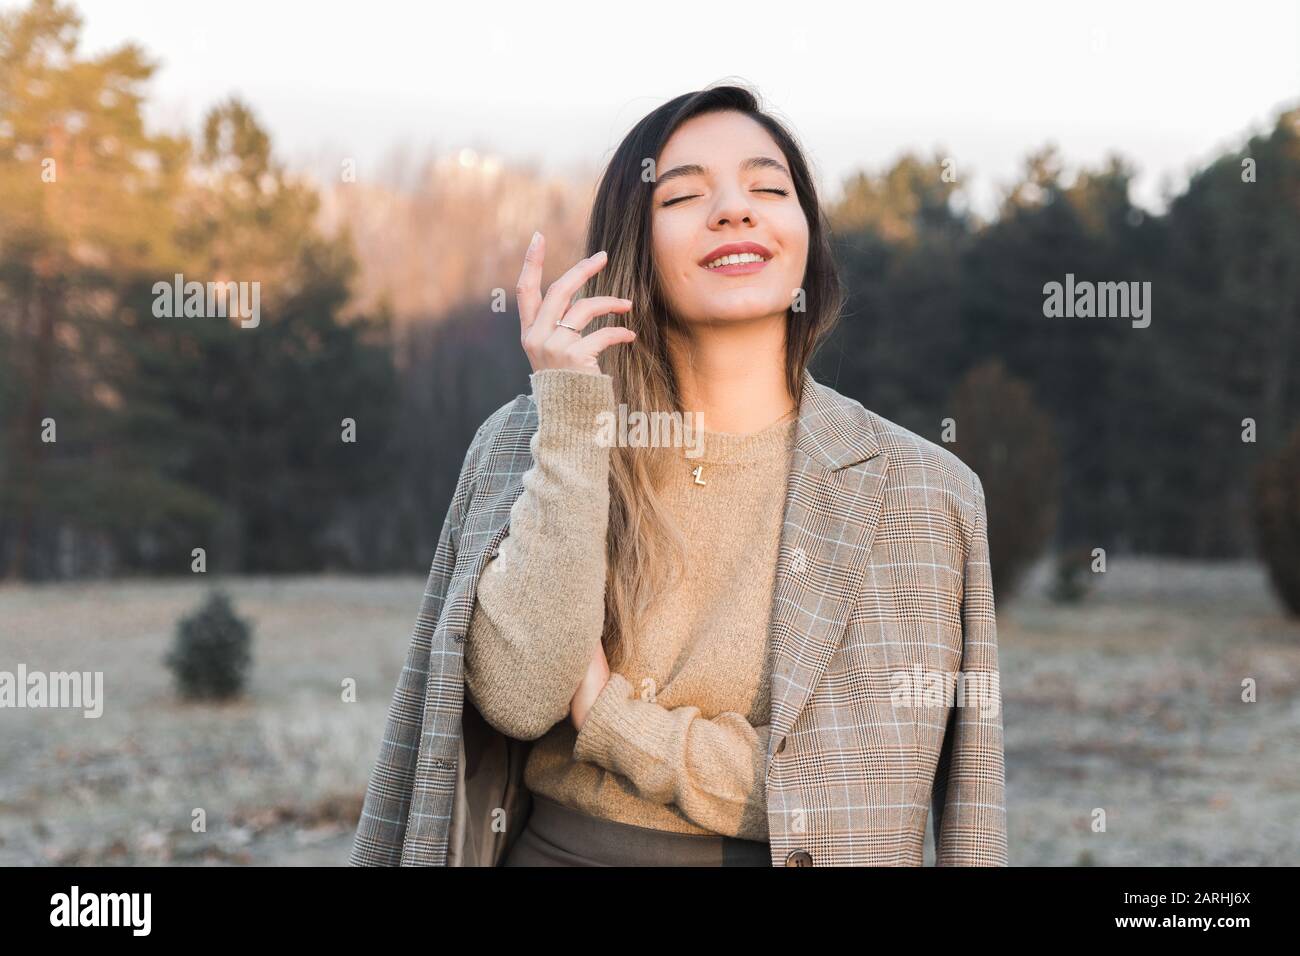 feminist movement. cheerful woman in casual clothes enjoying her existence out in nature Stock Photo